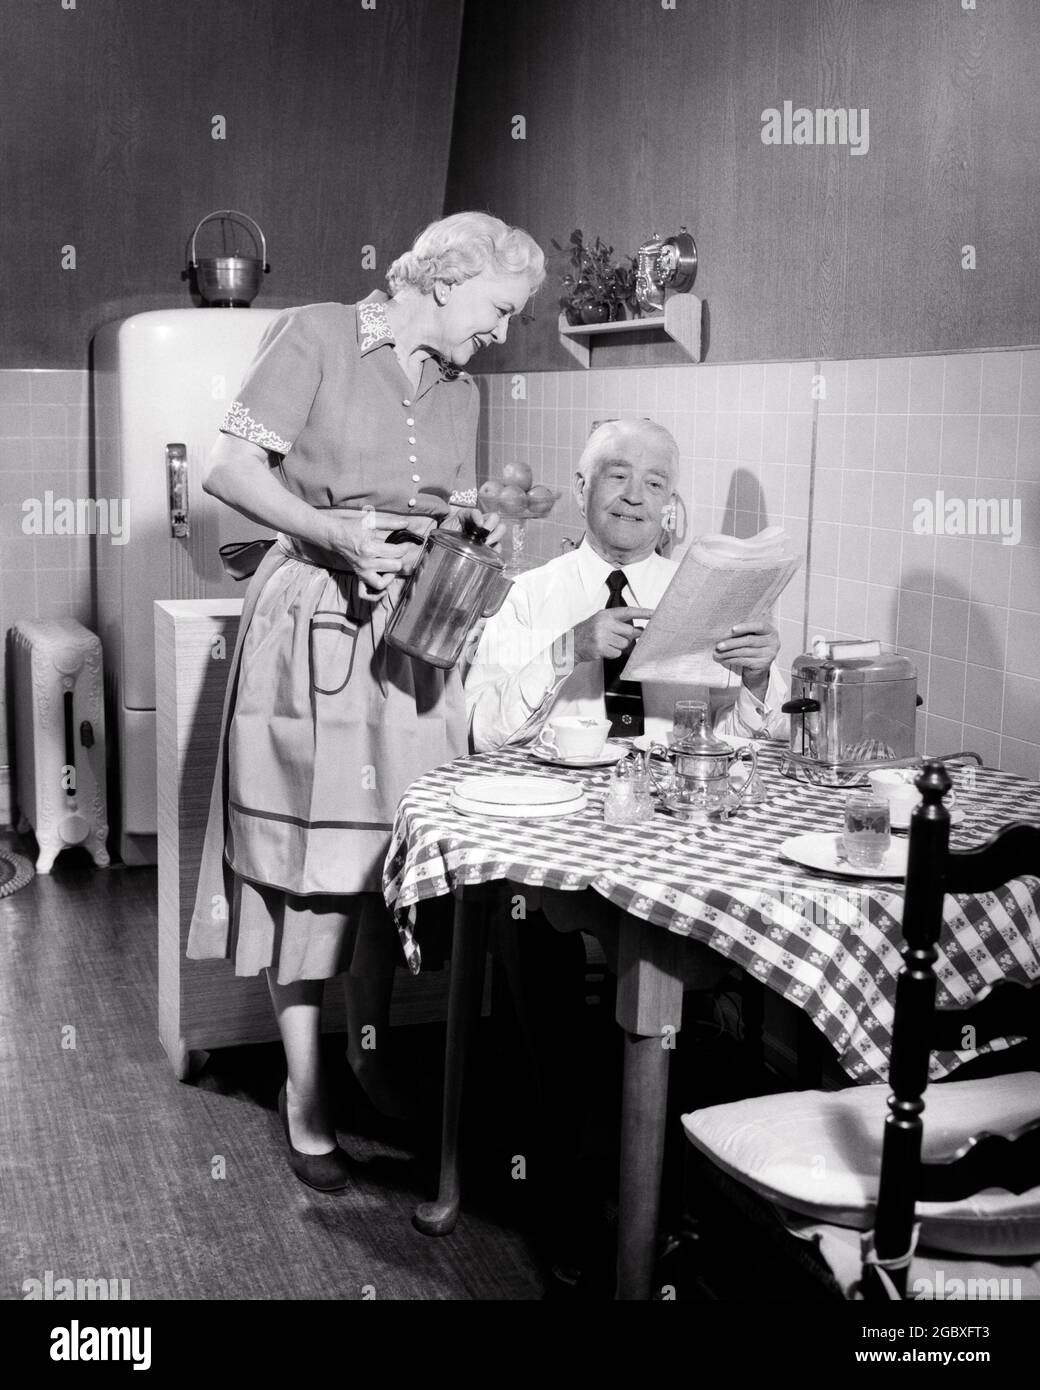 https://c8.alamy.com/comp/2GBXFT3/1950s-elderly-senior-retired-couple-at-apartment-kitchen-table-having-breakfast-woman-pouring-coffee-for-man-reading-newspaper-d366-har001-hars-having-communication-toaster-information-strong-lifestyle-satisfaction-elder-females-married-spouse-husbands-healthiness-home-life-copy-space-friendship-half-length-ladies-persons-caring-males-senior-man-senior-adult-apartment-bw-partner-senior-woman-happiness-old-age-pour-oldsters-high-angle-oldster-in-elders-connection-personal-attachment-affection-emotion-togetherness-wives-black-and-white-caucasian-ethnicity-har001-old-fashioned-percolator-2GBXFT3.jpg